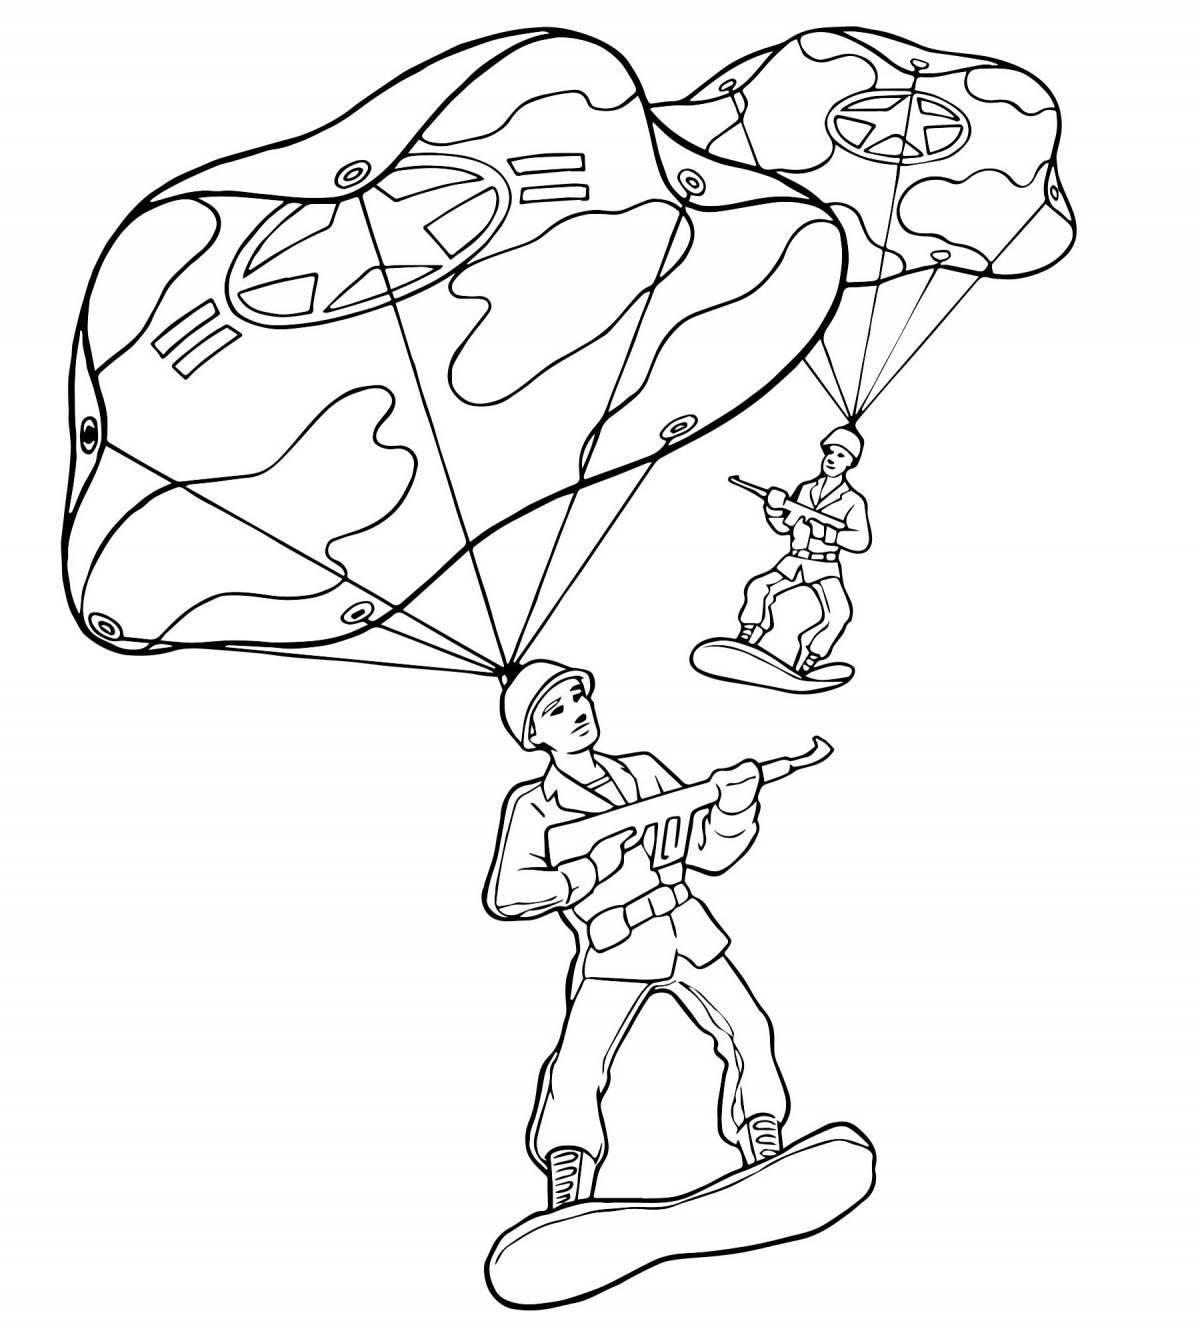 Animated paratrooper coloring page